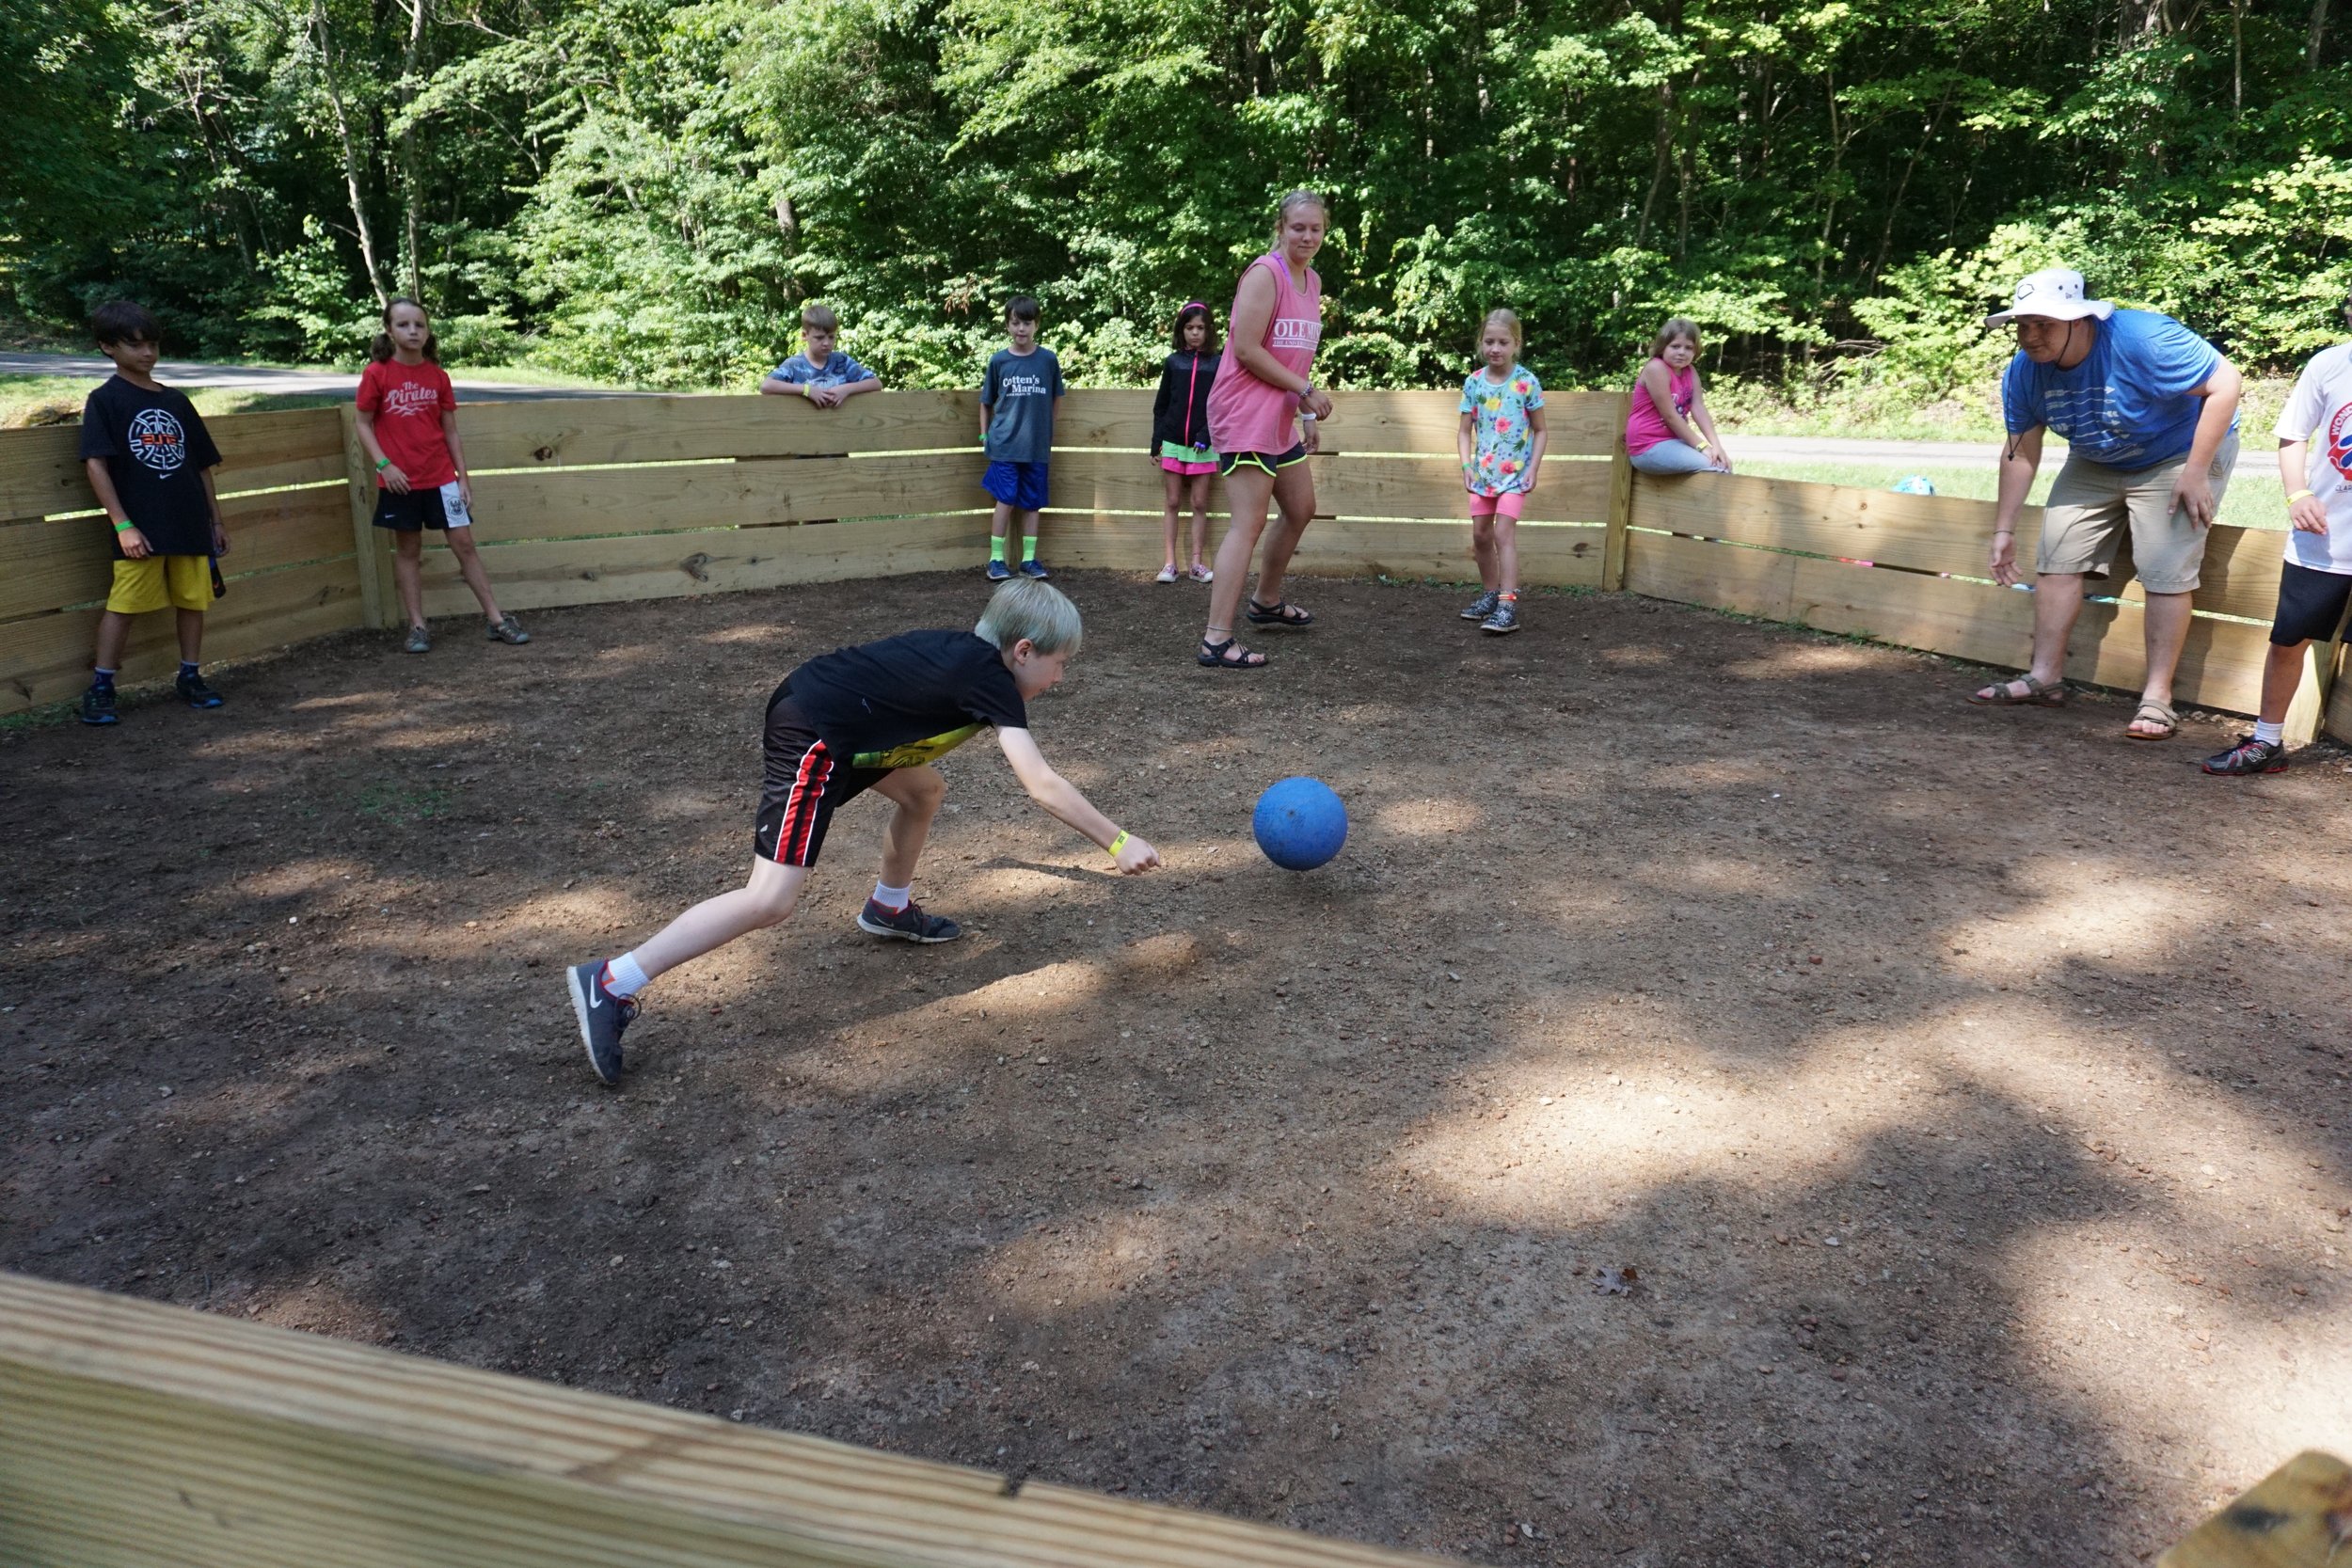  An intergenerational group of Summer Campers playing ball in a circle - NaCoMe Camp &amp; Conference Center 